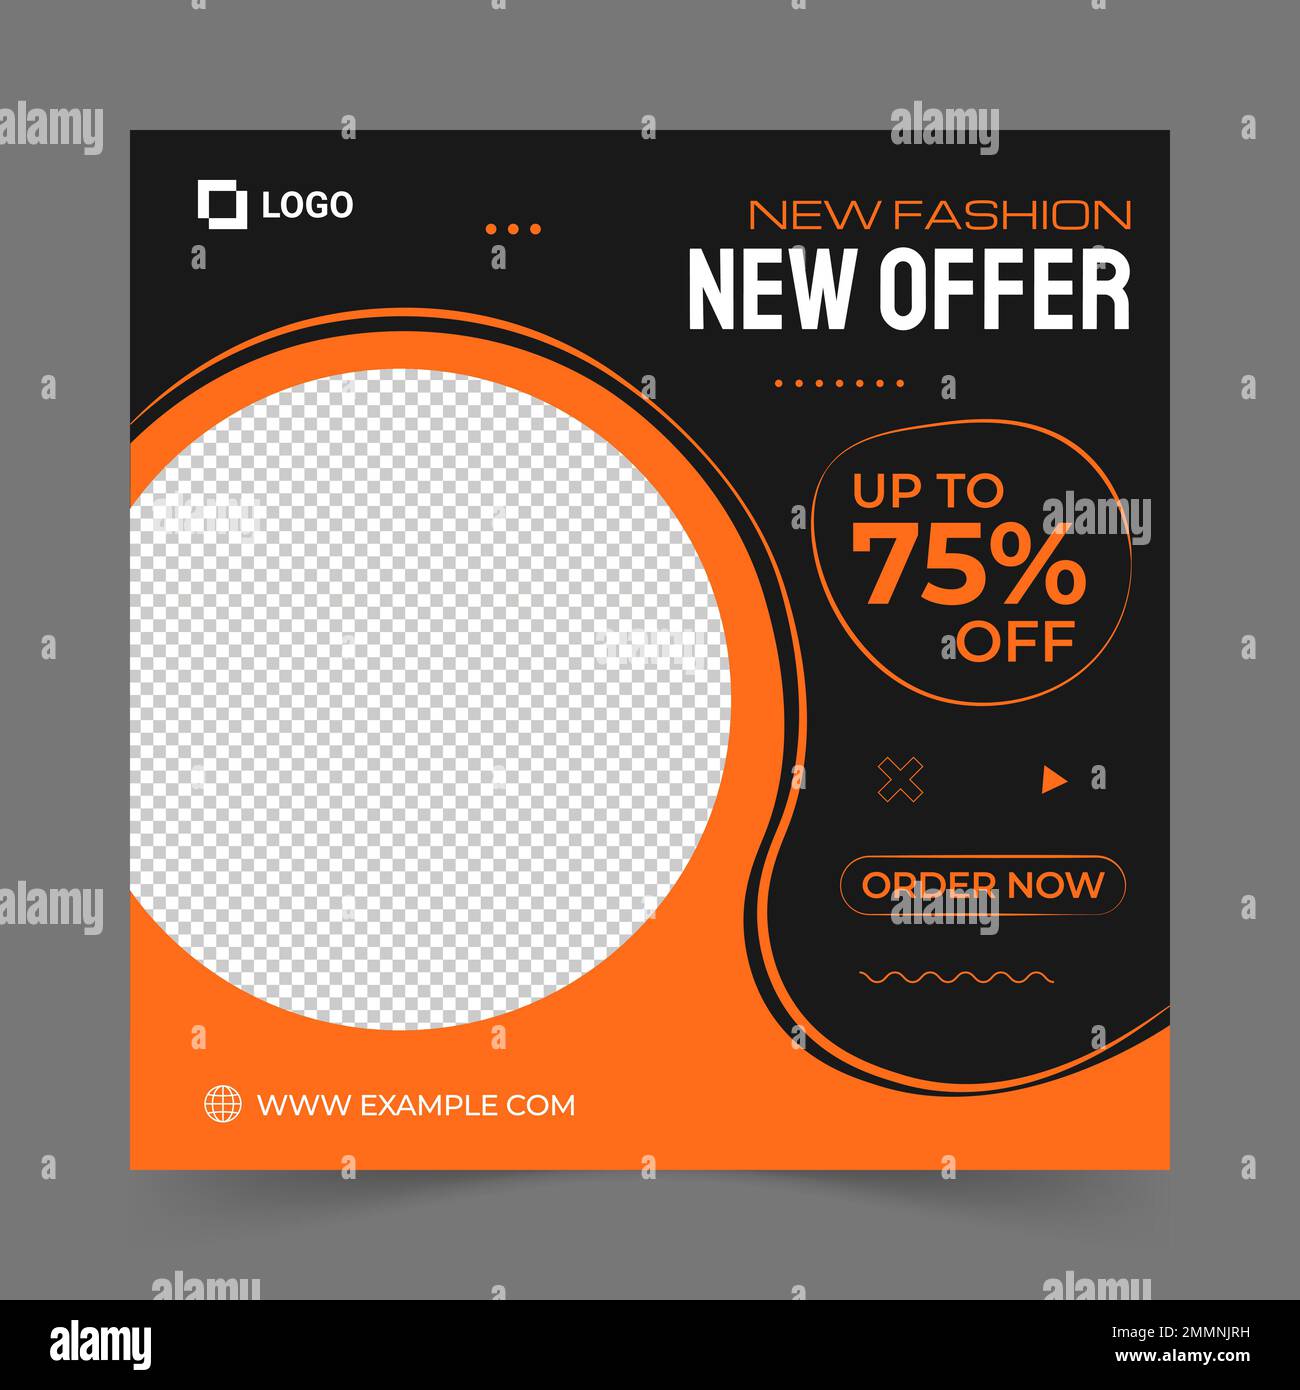 New offer social media post and web banner template for digital marketing. Trendy editable template for product promotion Stock Vector